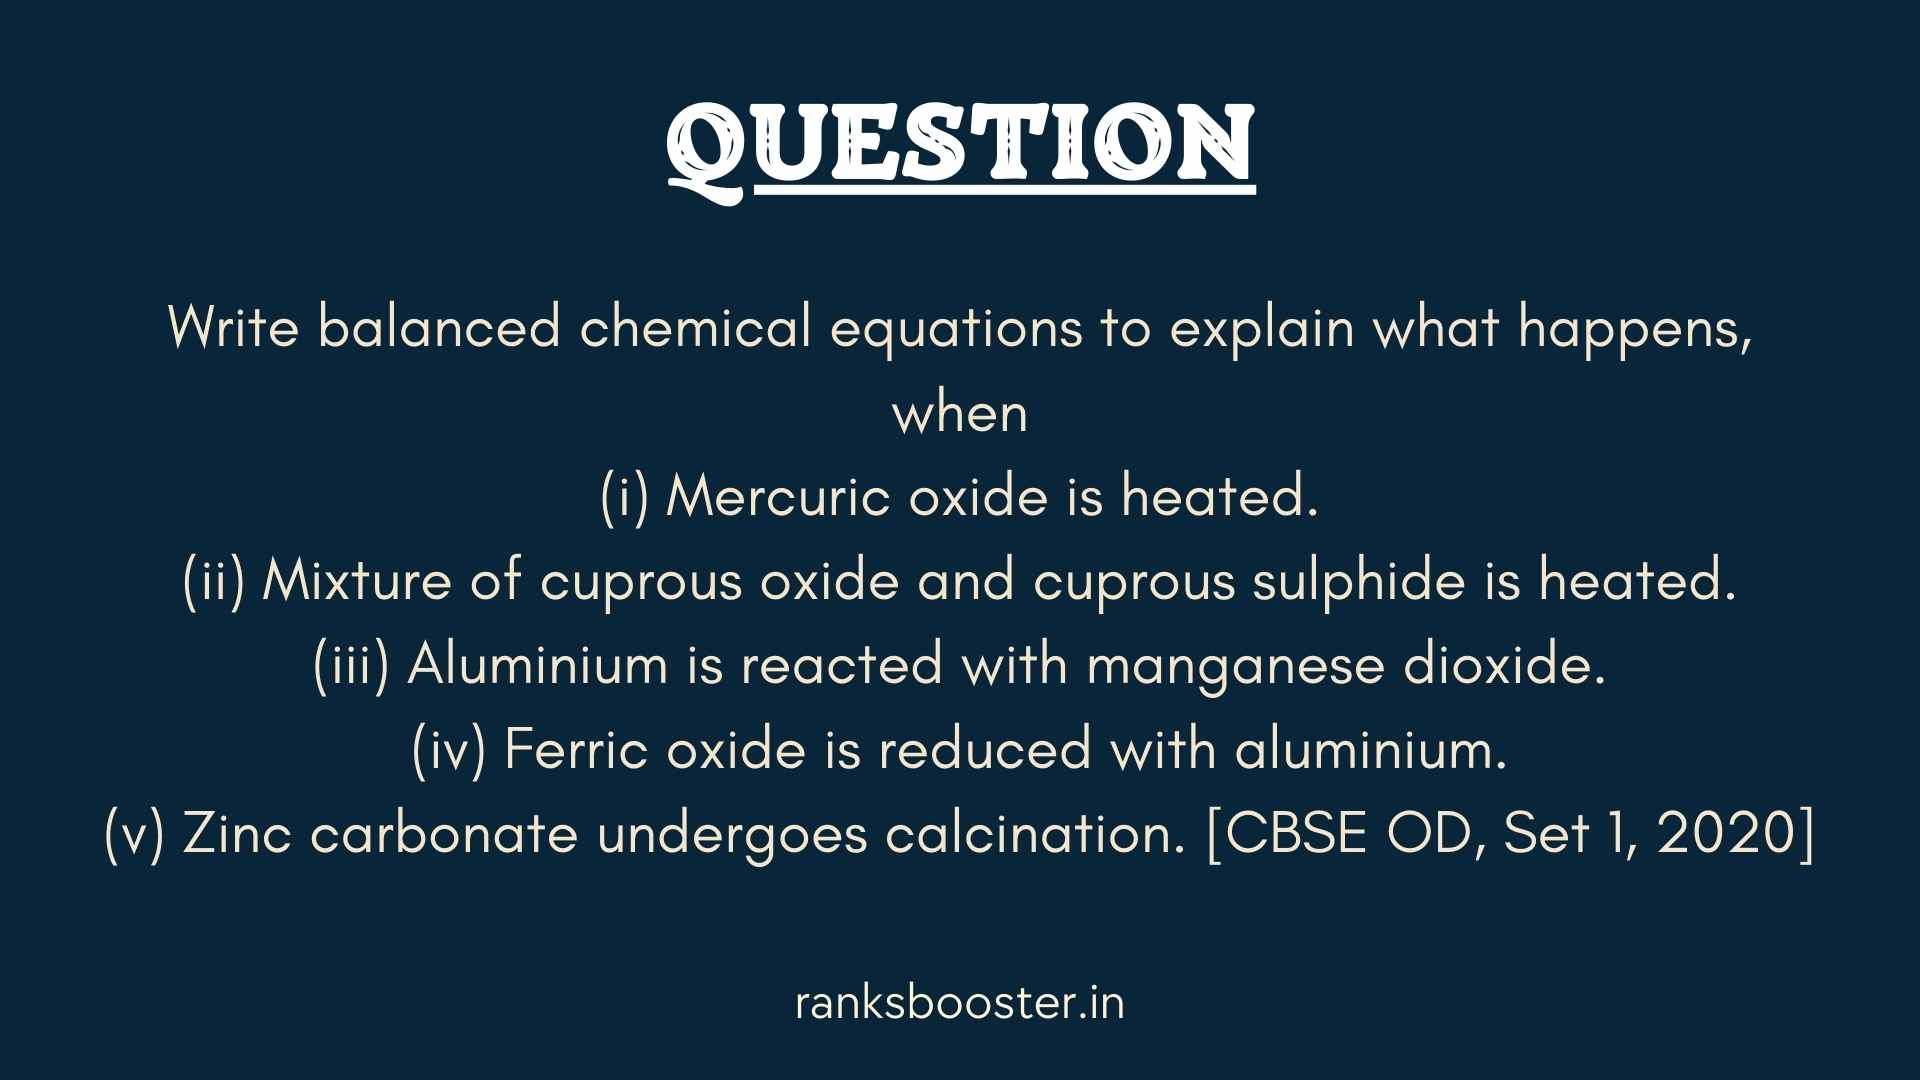 Question: Write balanced chemical equations to explain what happens, when (i) Mercuric oxide is heated. (ii) Mixture of cuprous oxide and cuprous sulphide is heated. (iii) Aluminium is reacted with manganese dioxide. (iv) Ferric oxide is reduced with aluminium. (v) Zinc carbonate undergoes calcination. [CBSE OD, Set 1, 2020]